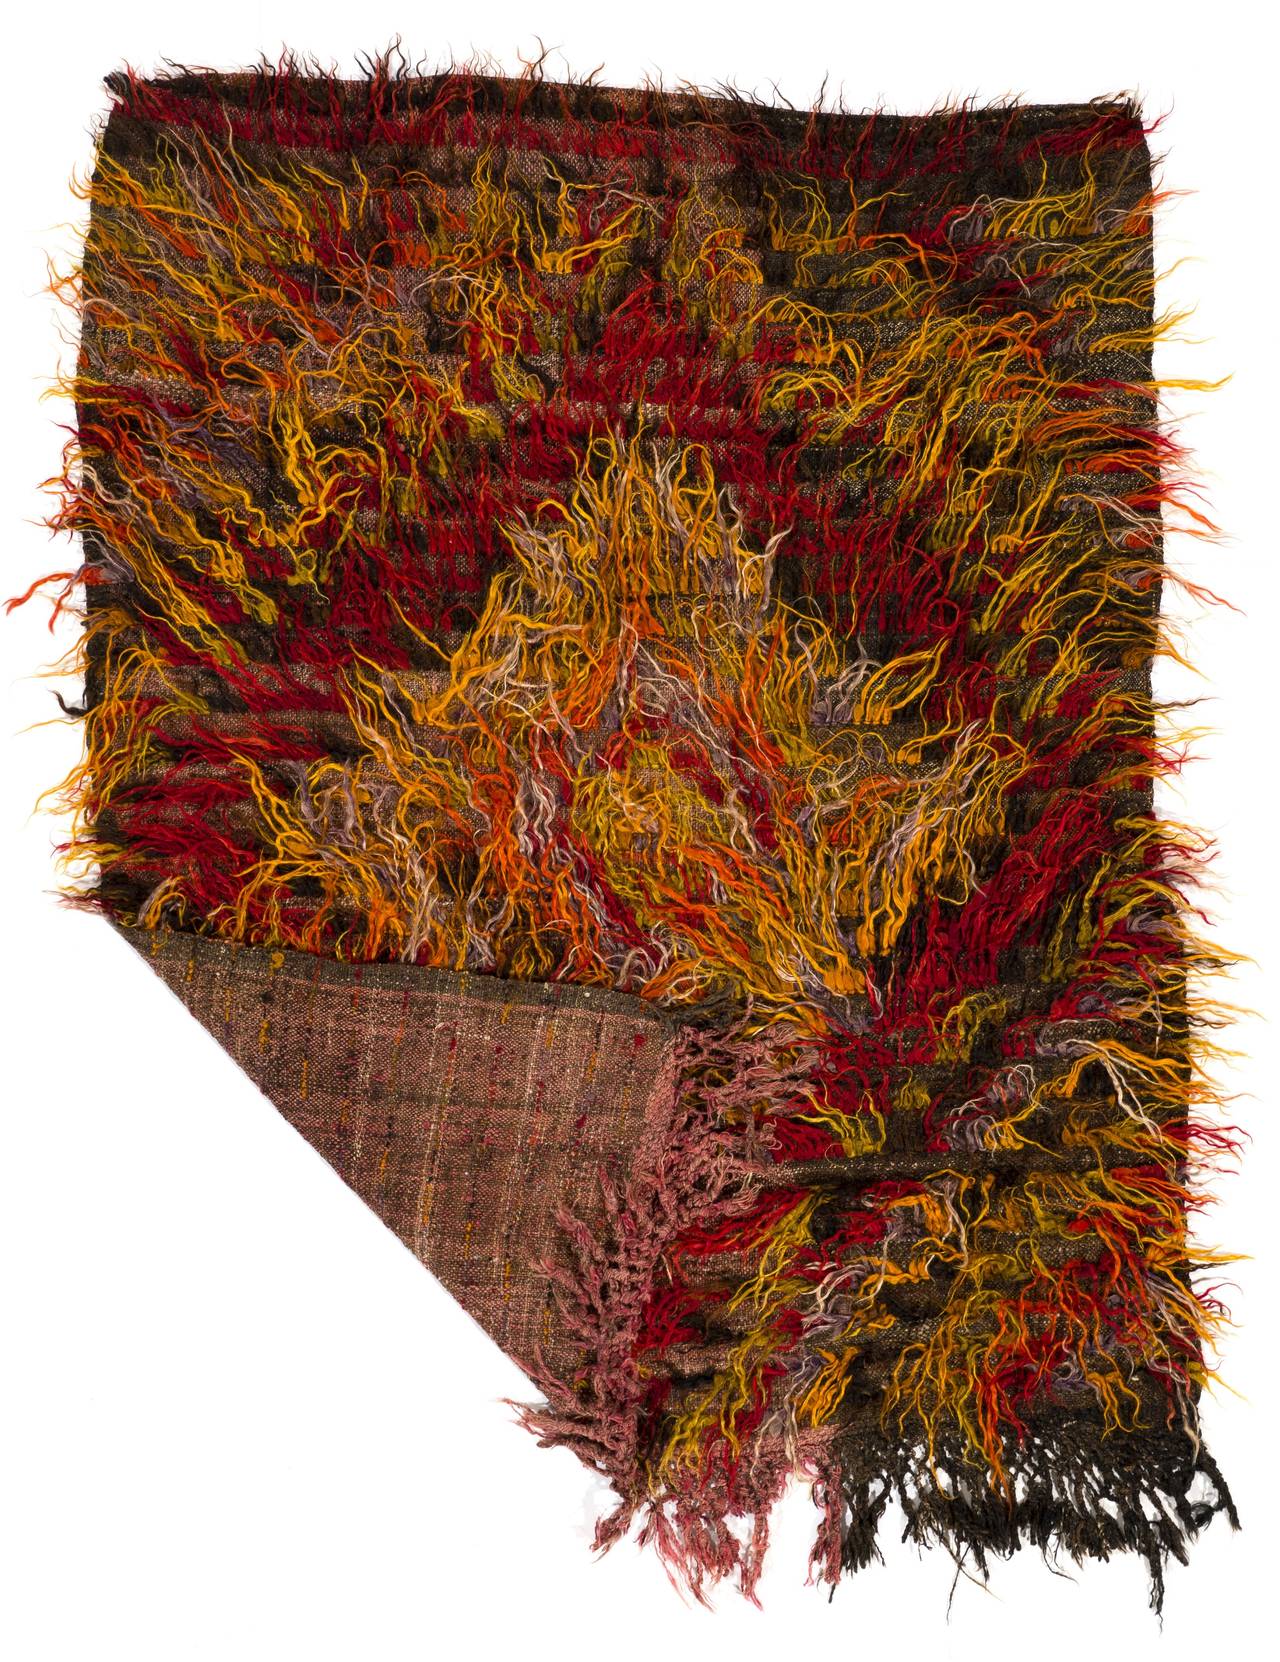 This vintage handmade rug is called "Flikli" in Turkey which is a word for a "flokati" style shag pile (Tulu) handmade rugs produced for daily use by Nomads in Central Anatolia. 

This particular one is made of tufts of local